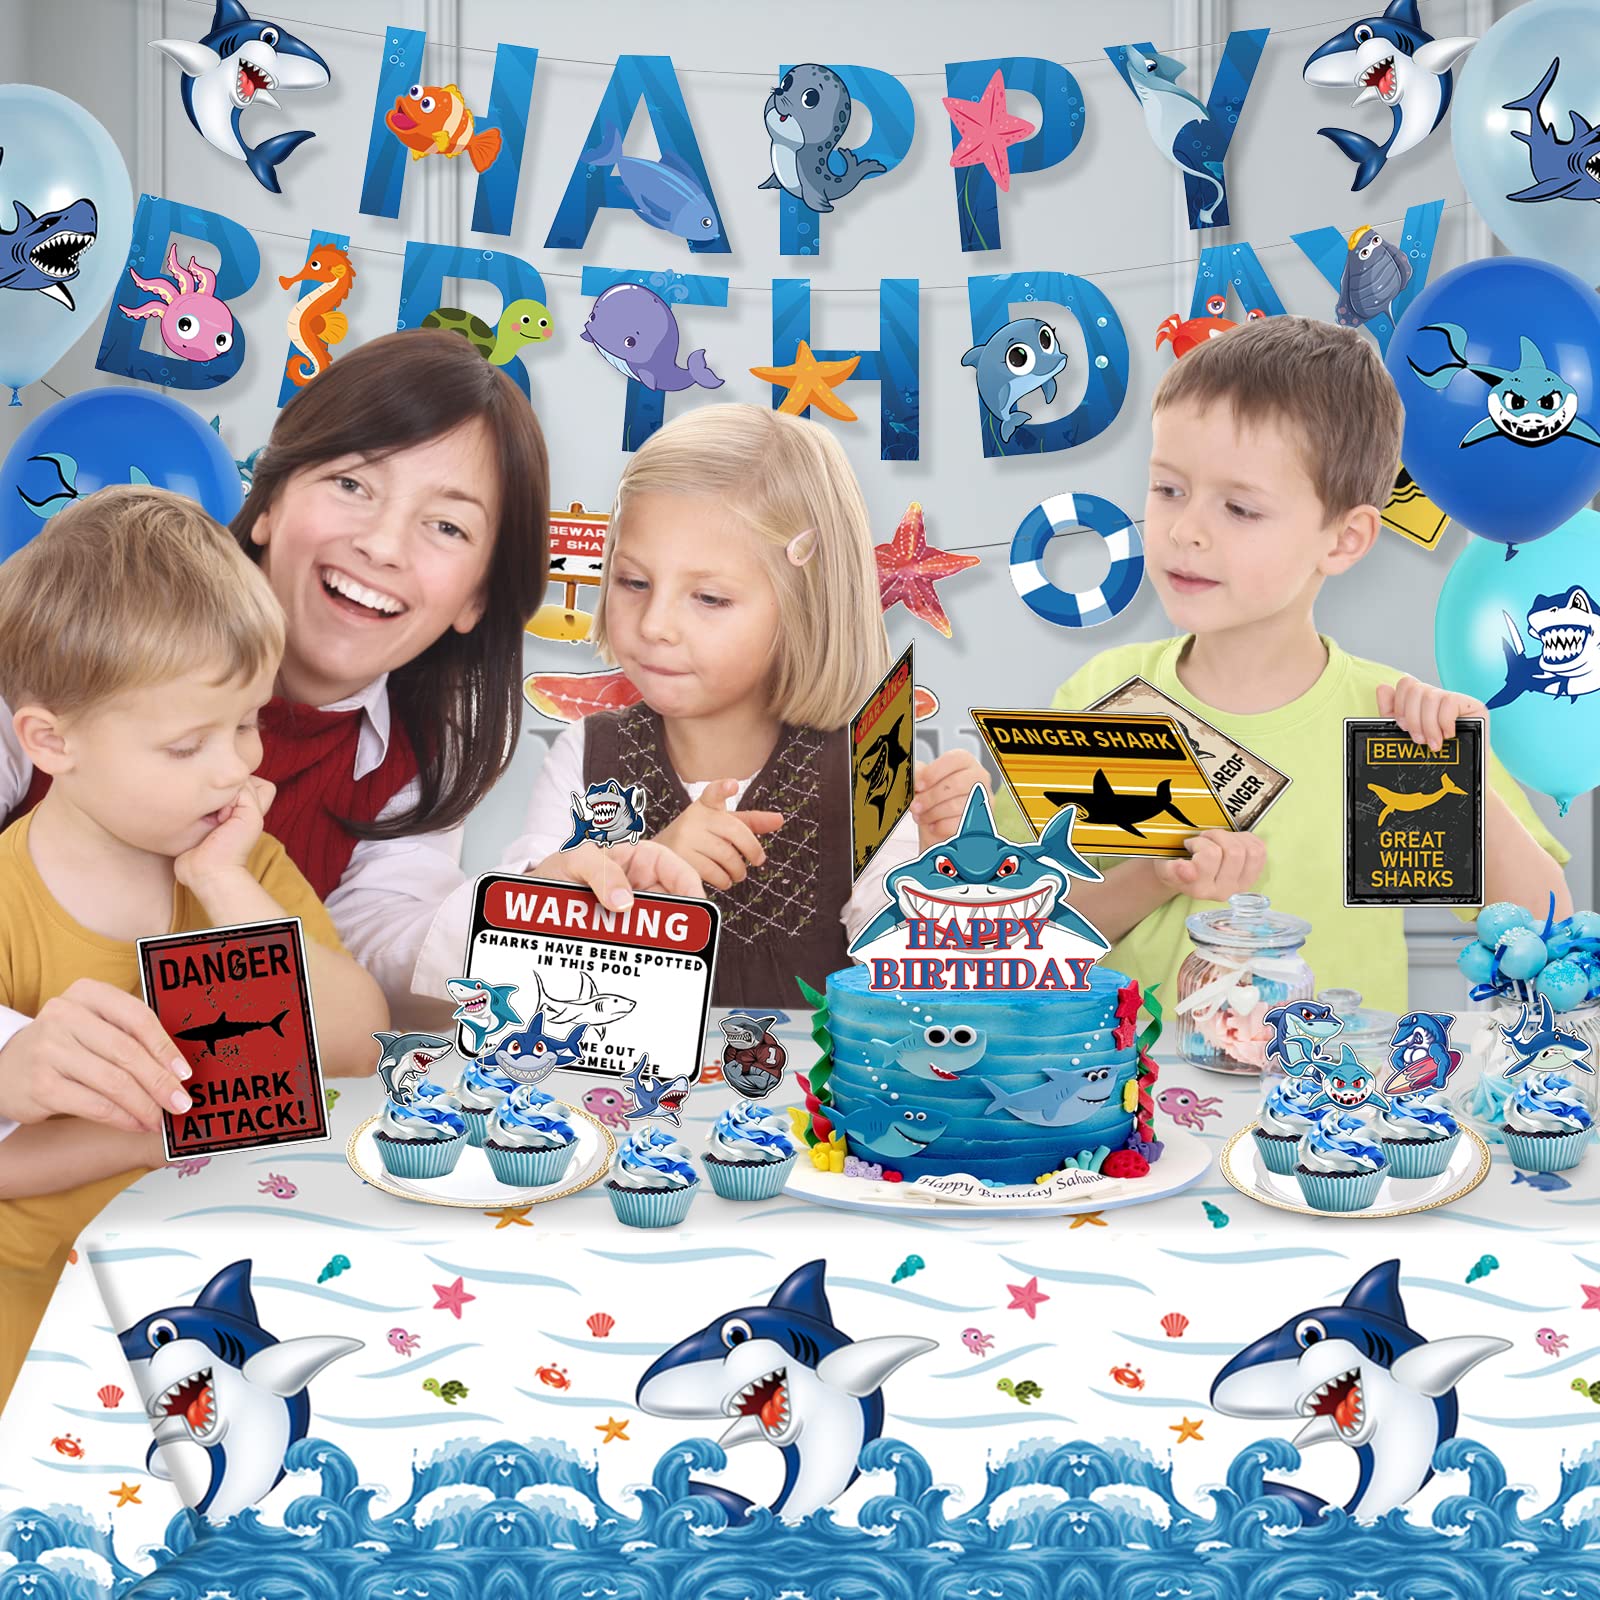 Shark Birthday Decorations, Ocean Shark Party Decorations Include Shark Balloons, Happy Birthday Banners, Cupcake & Cake Toppers, Shark Signs and Tablecloth for Boys Girls Ocean Theme Shark Party